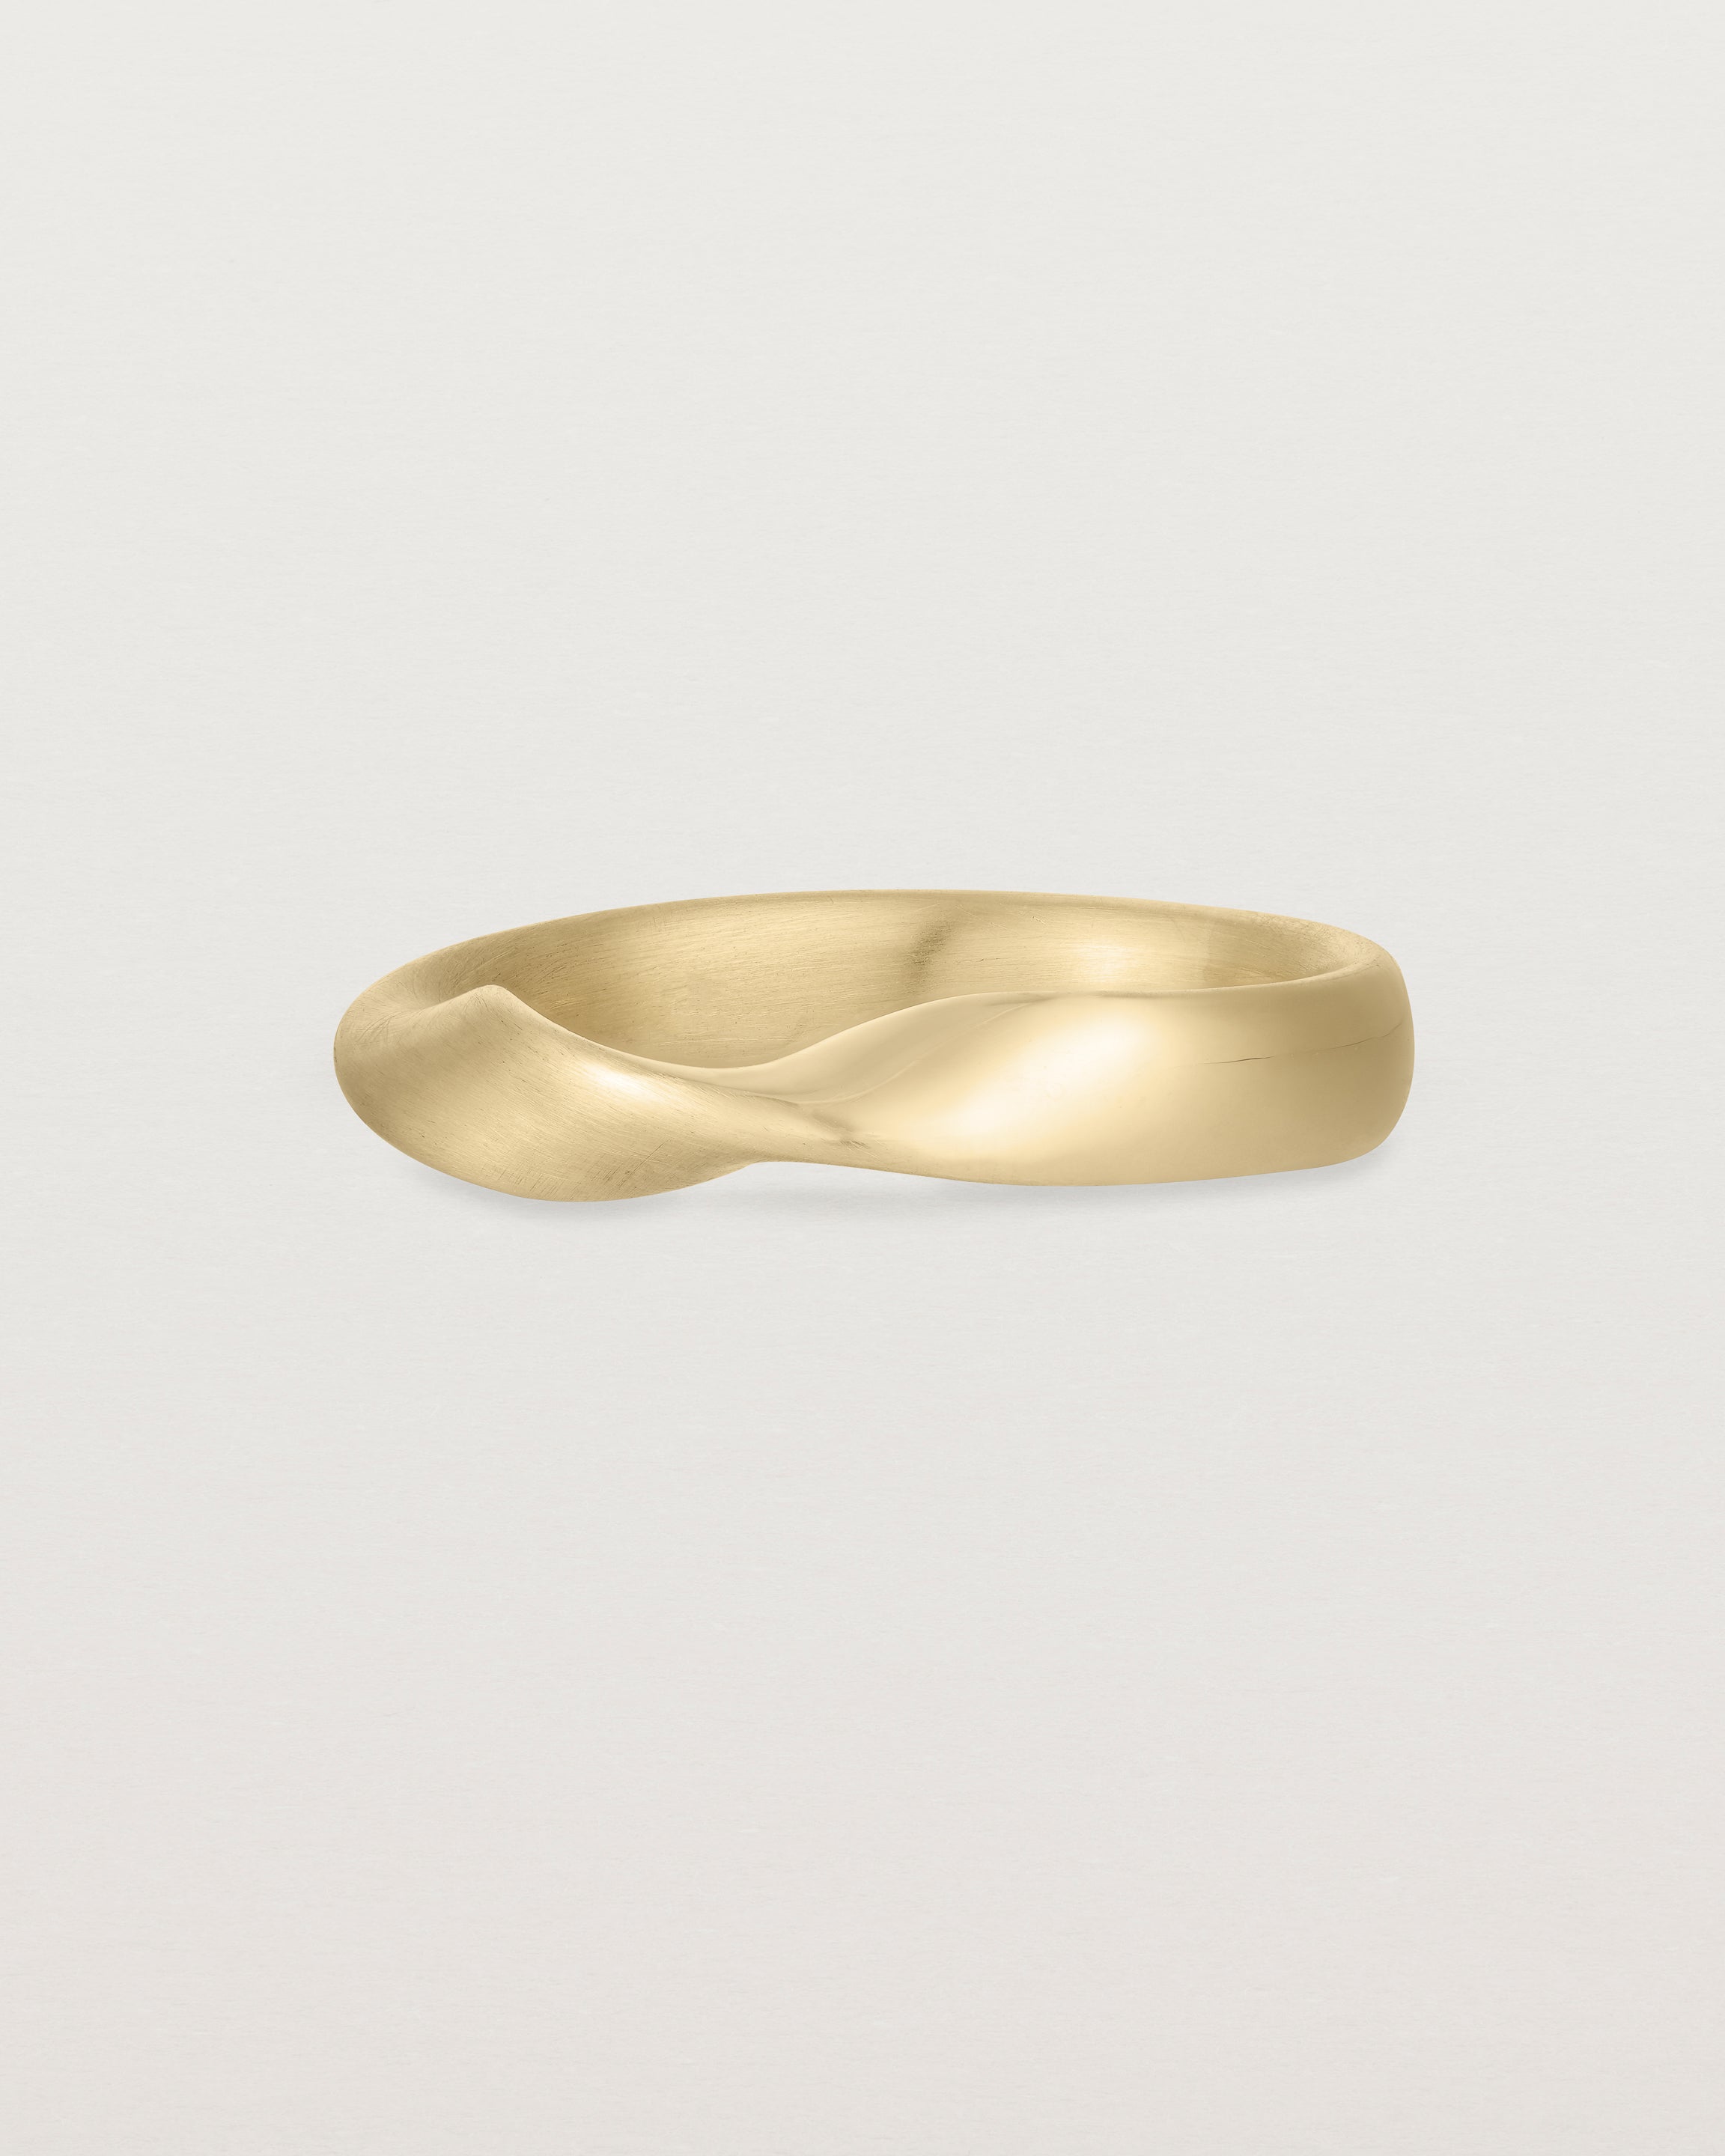 Angled view of the Ellipse / Shift Ring in Yellow Gold.